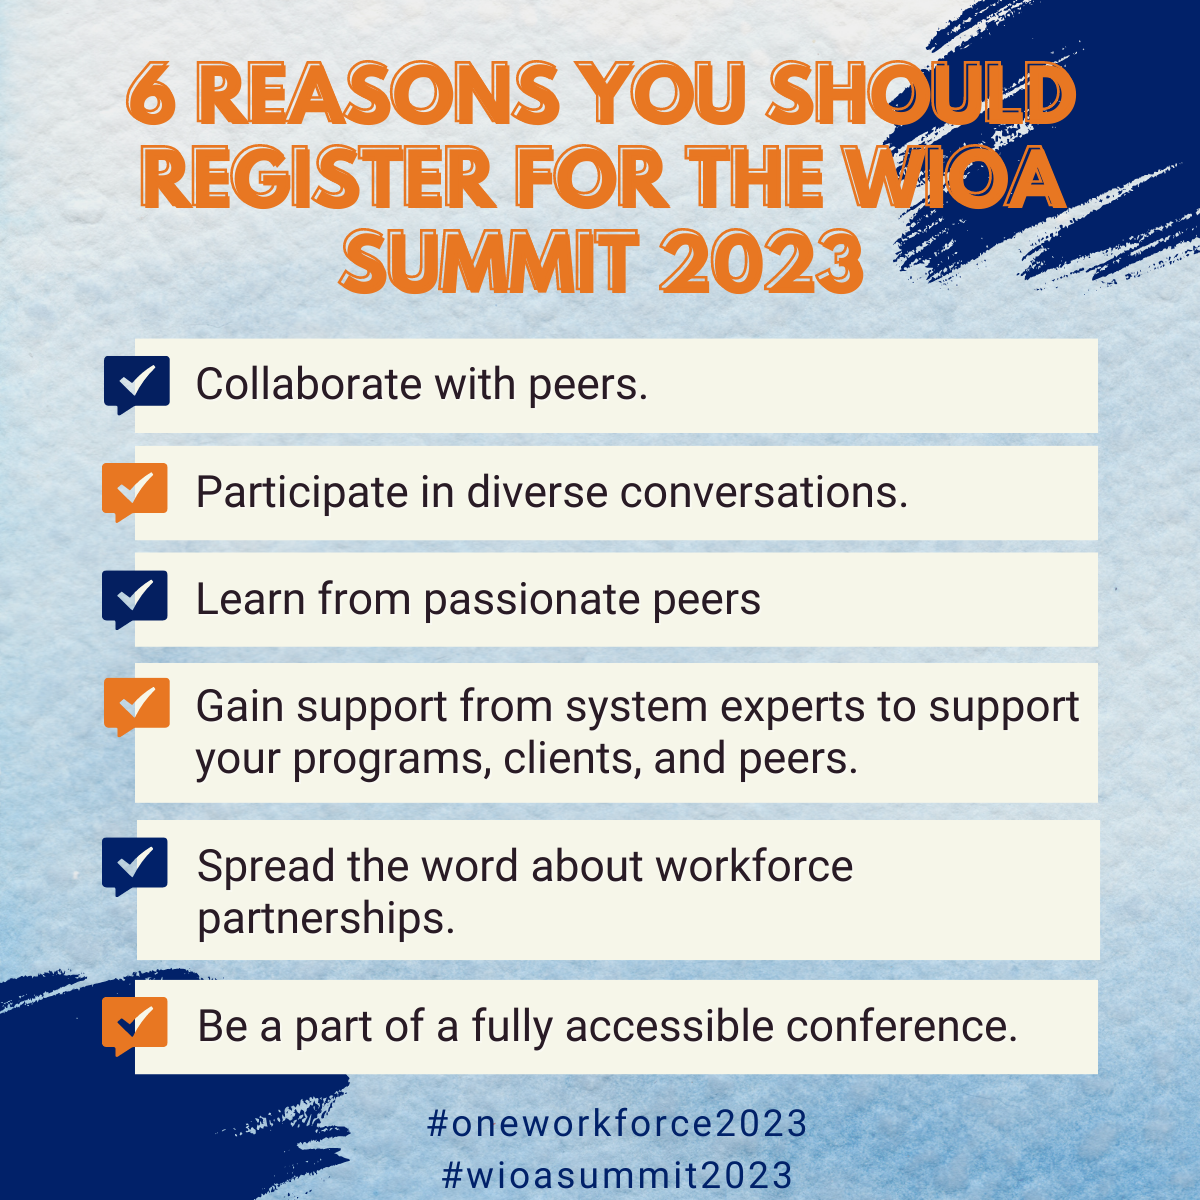 Six reasons you should register for the WIOA Summit